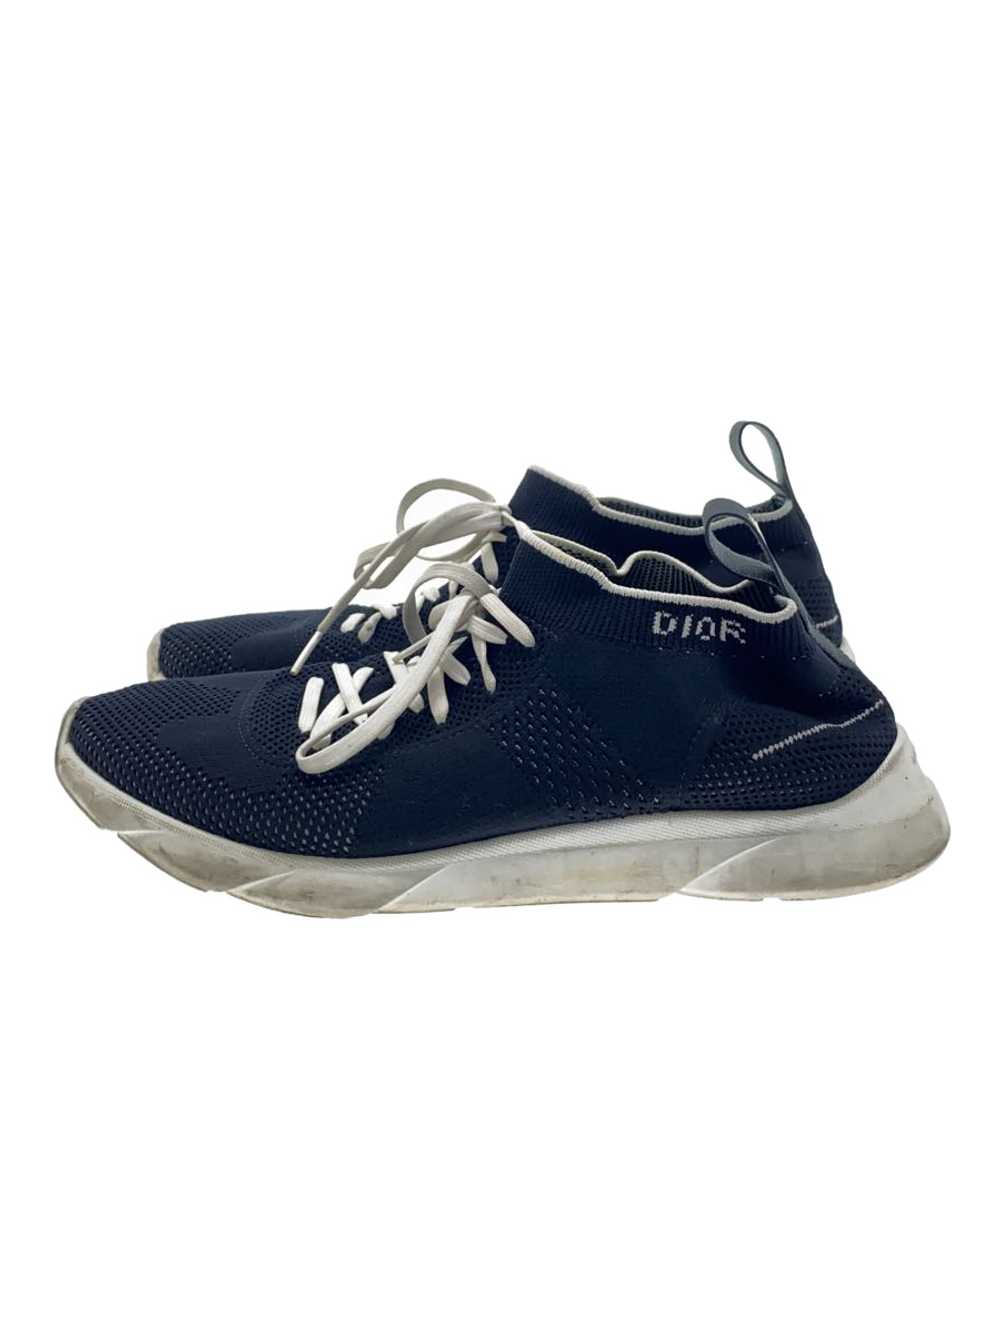 Dior Homme Technical Knit/Bee/Low Cut Sneakers/42… - image 1